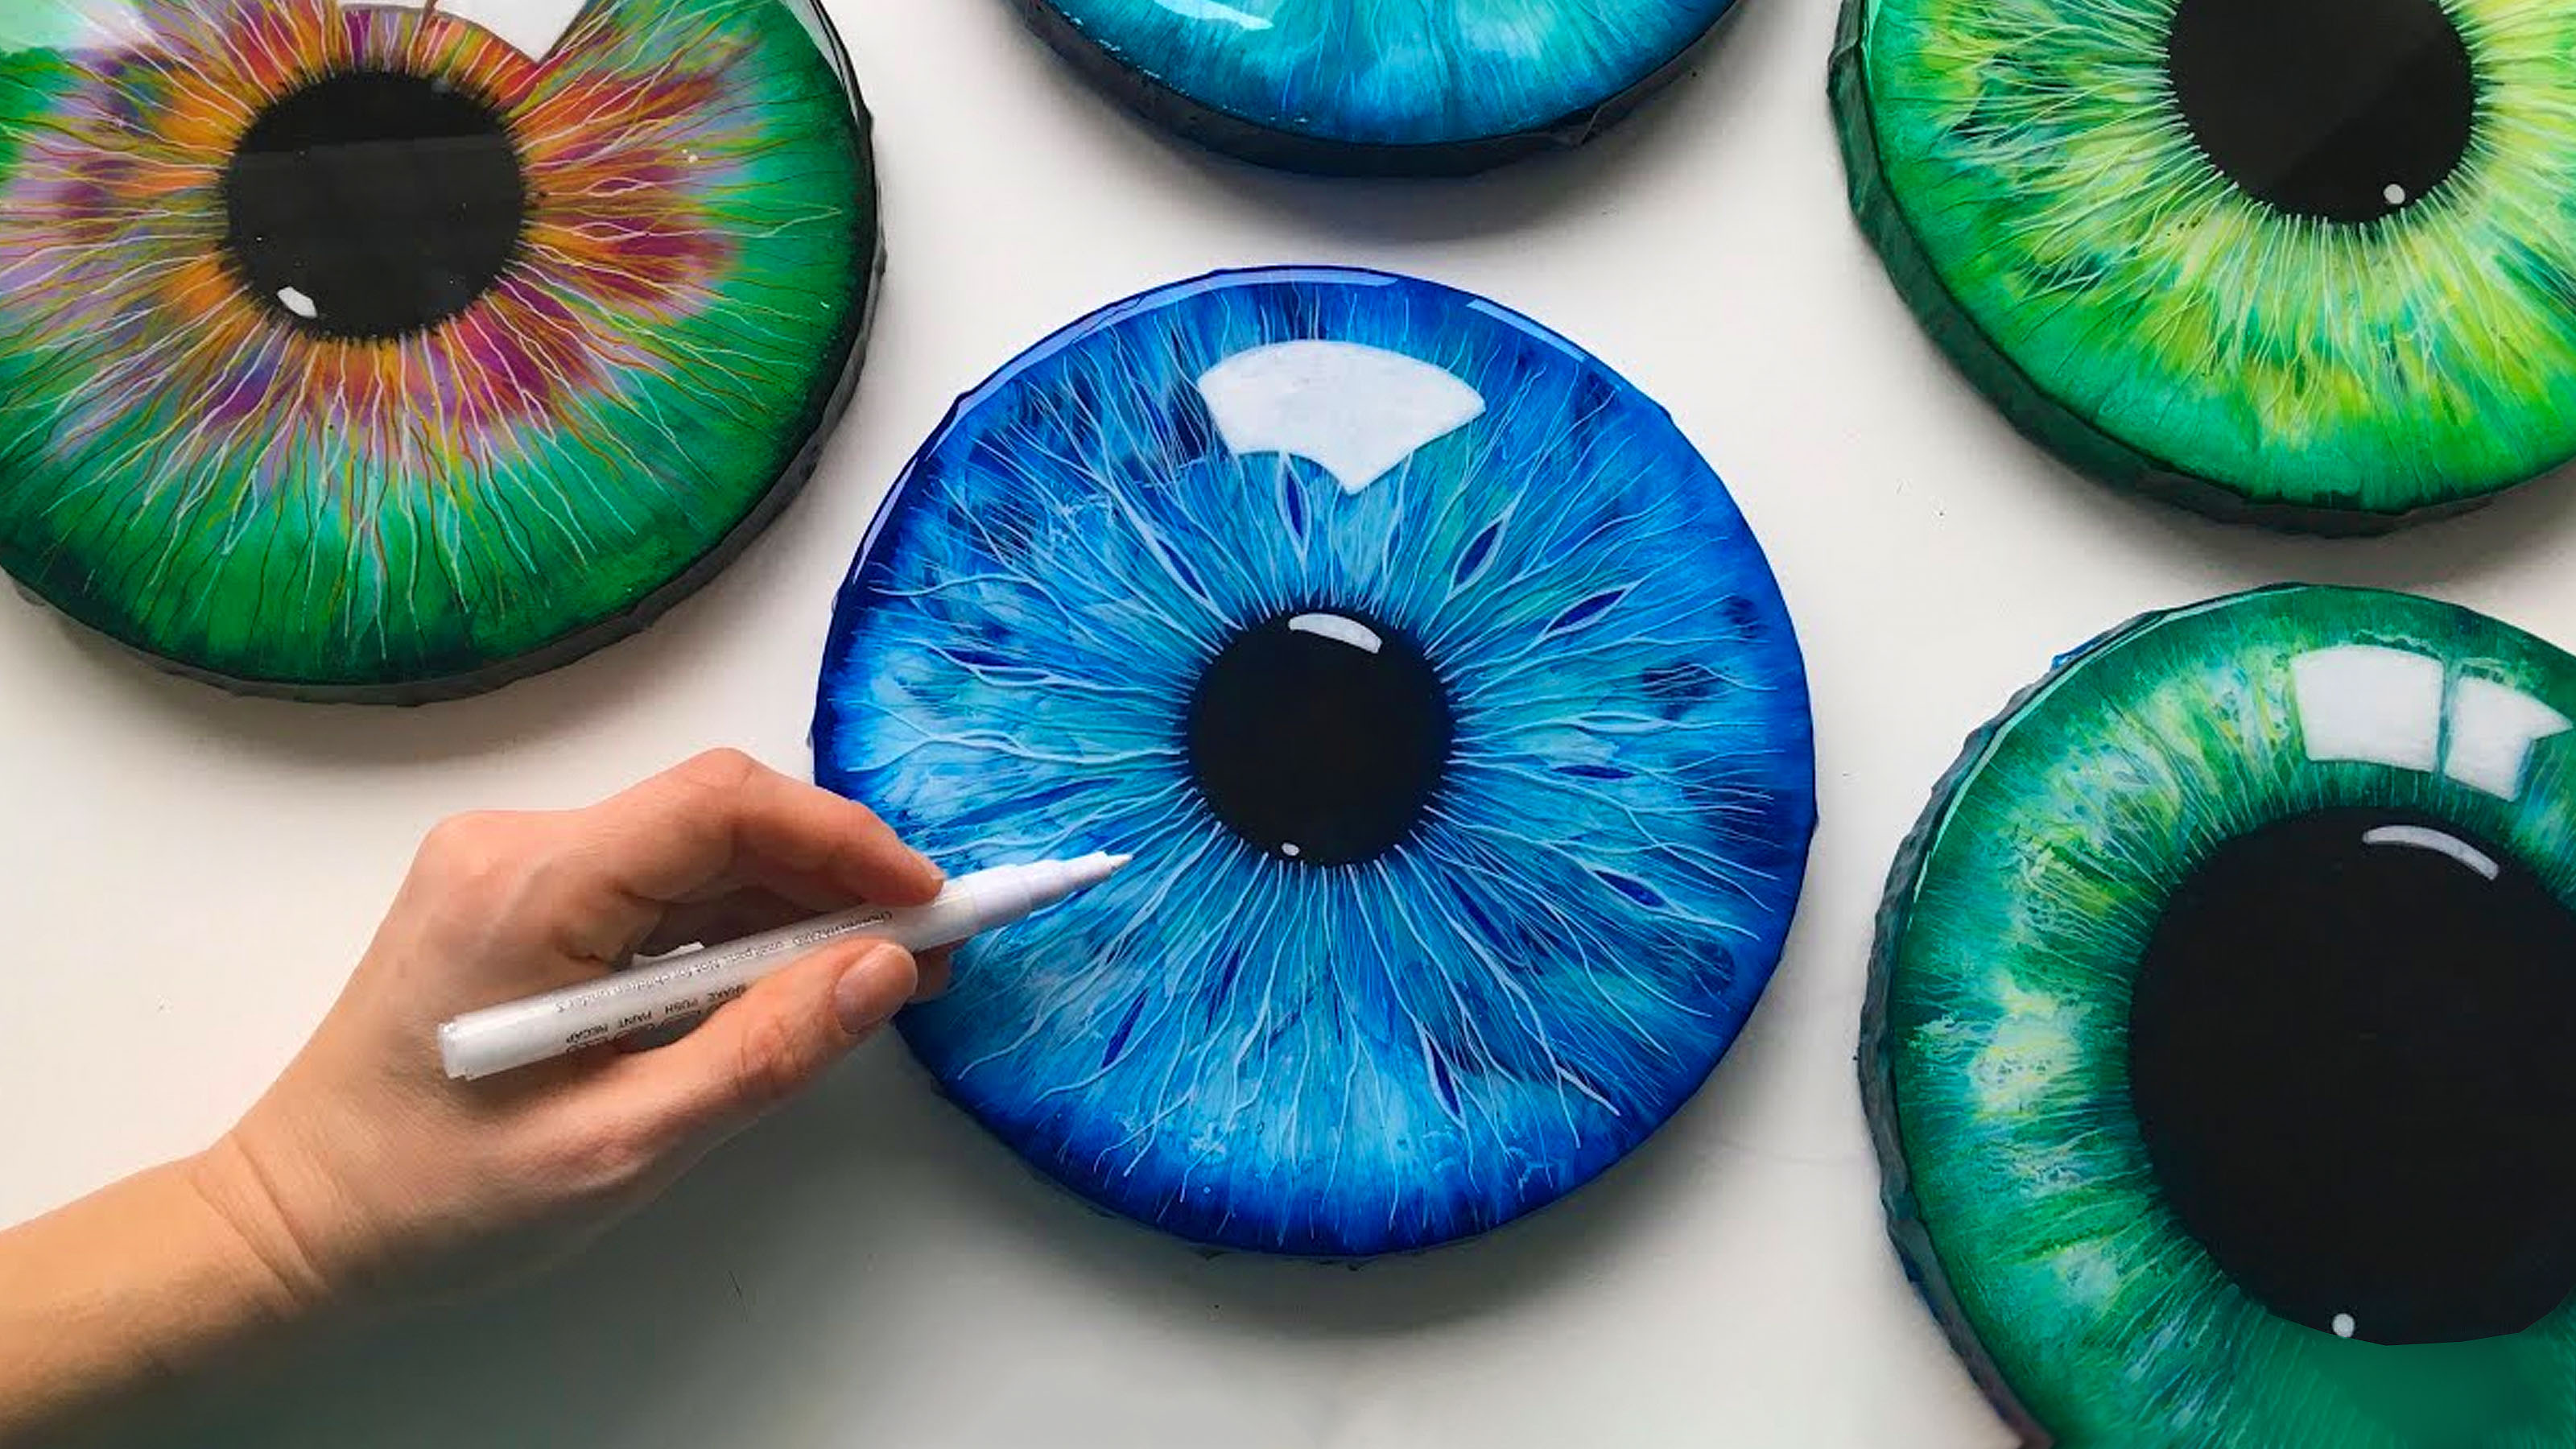 These paintings are eye-wateringly realistic